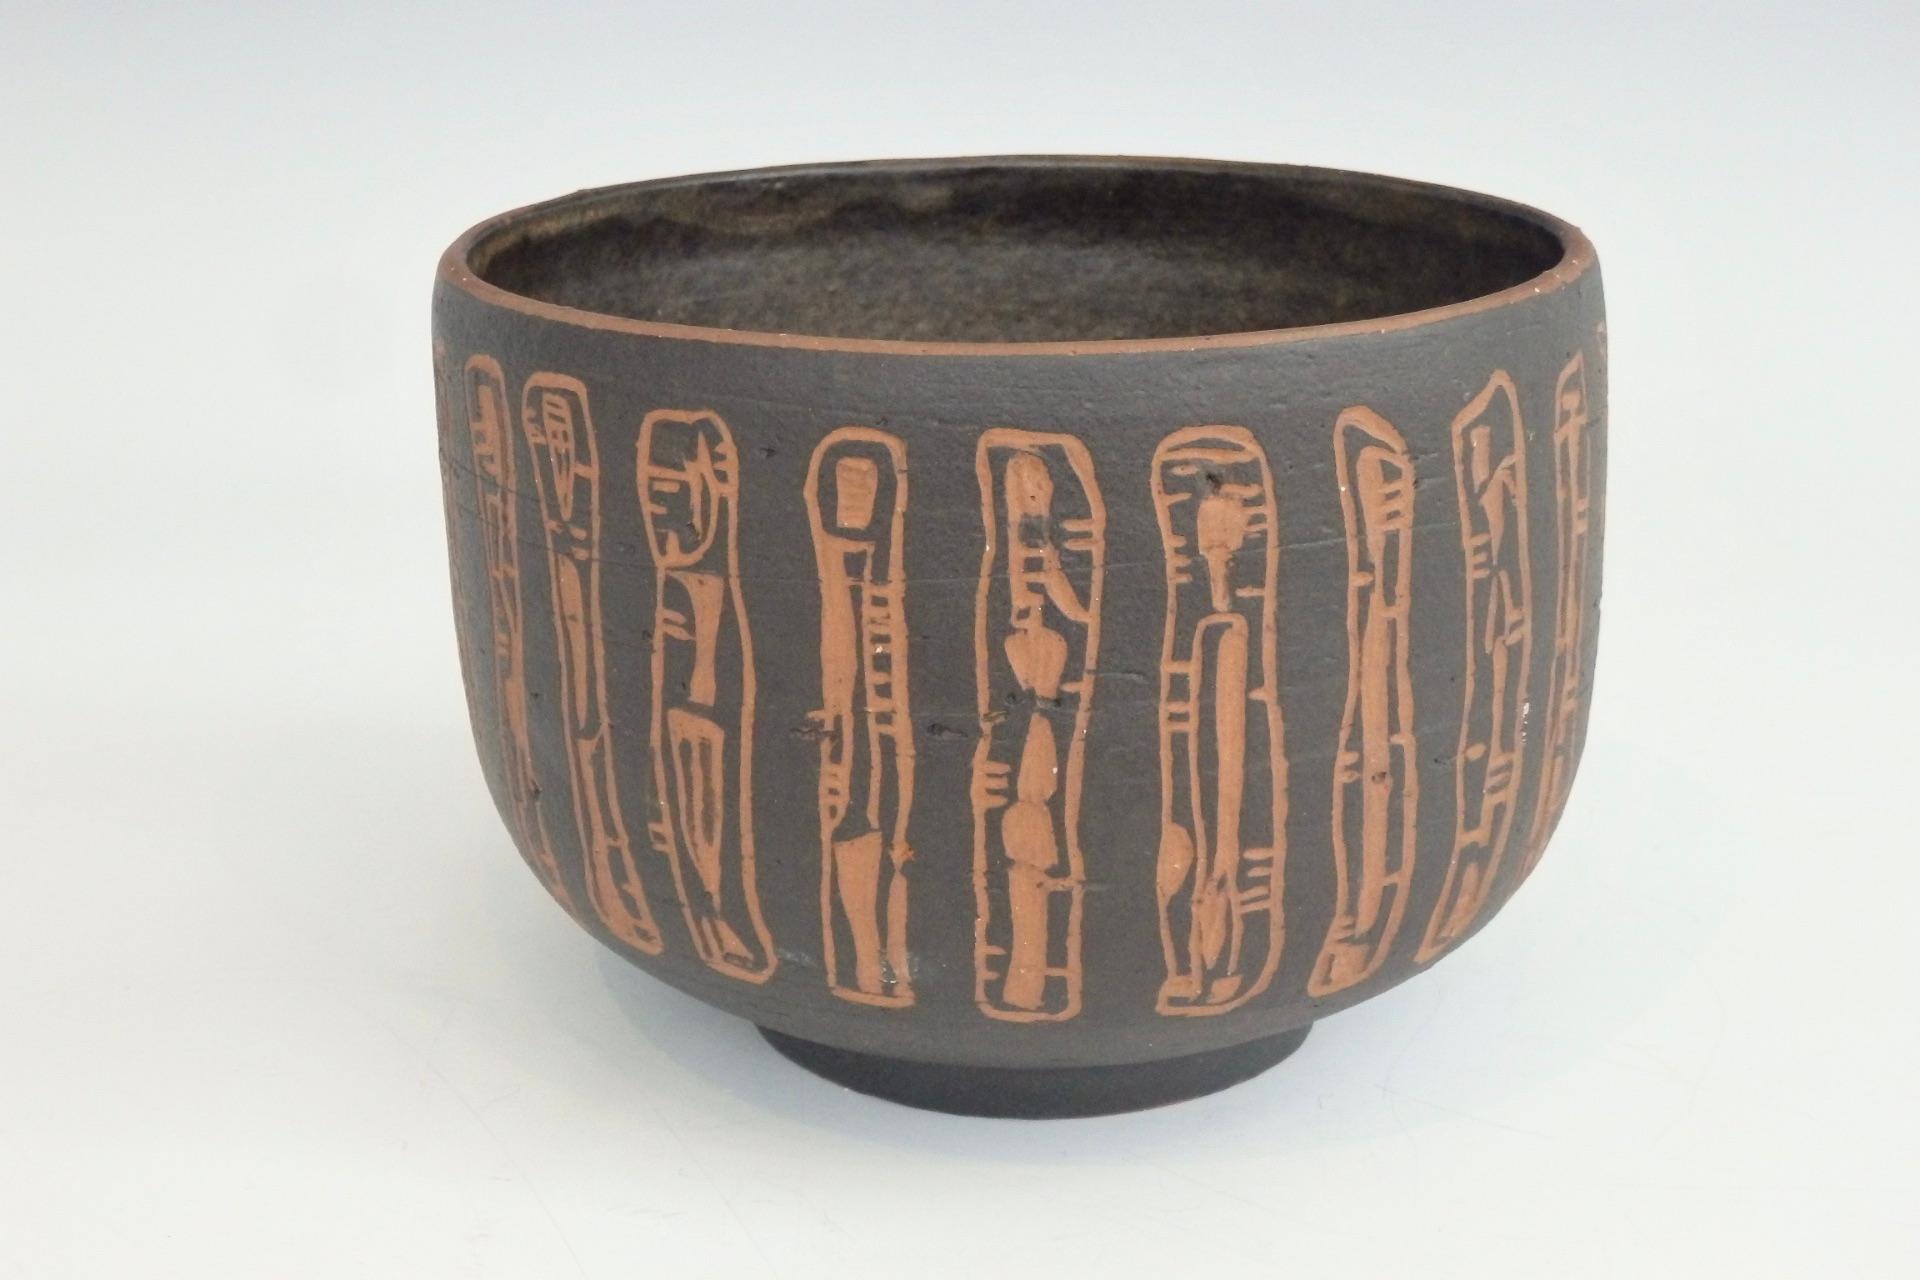 Rozsika Blackstone New York and Arizona, circa 1920-62 pottery vessel.
Deep bowl in dark brown glaze, sgraffito decorated in an abstract vertical design allowing the red ware body to show through, raised on circular foot, incised signature R.B.